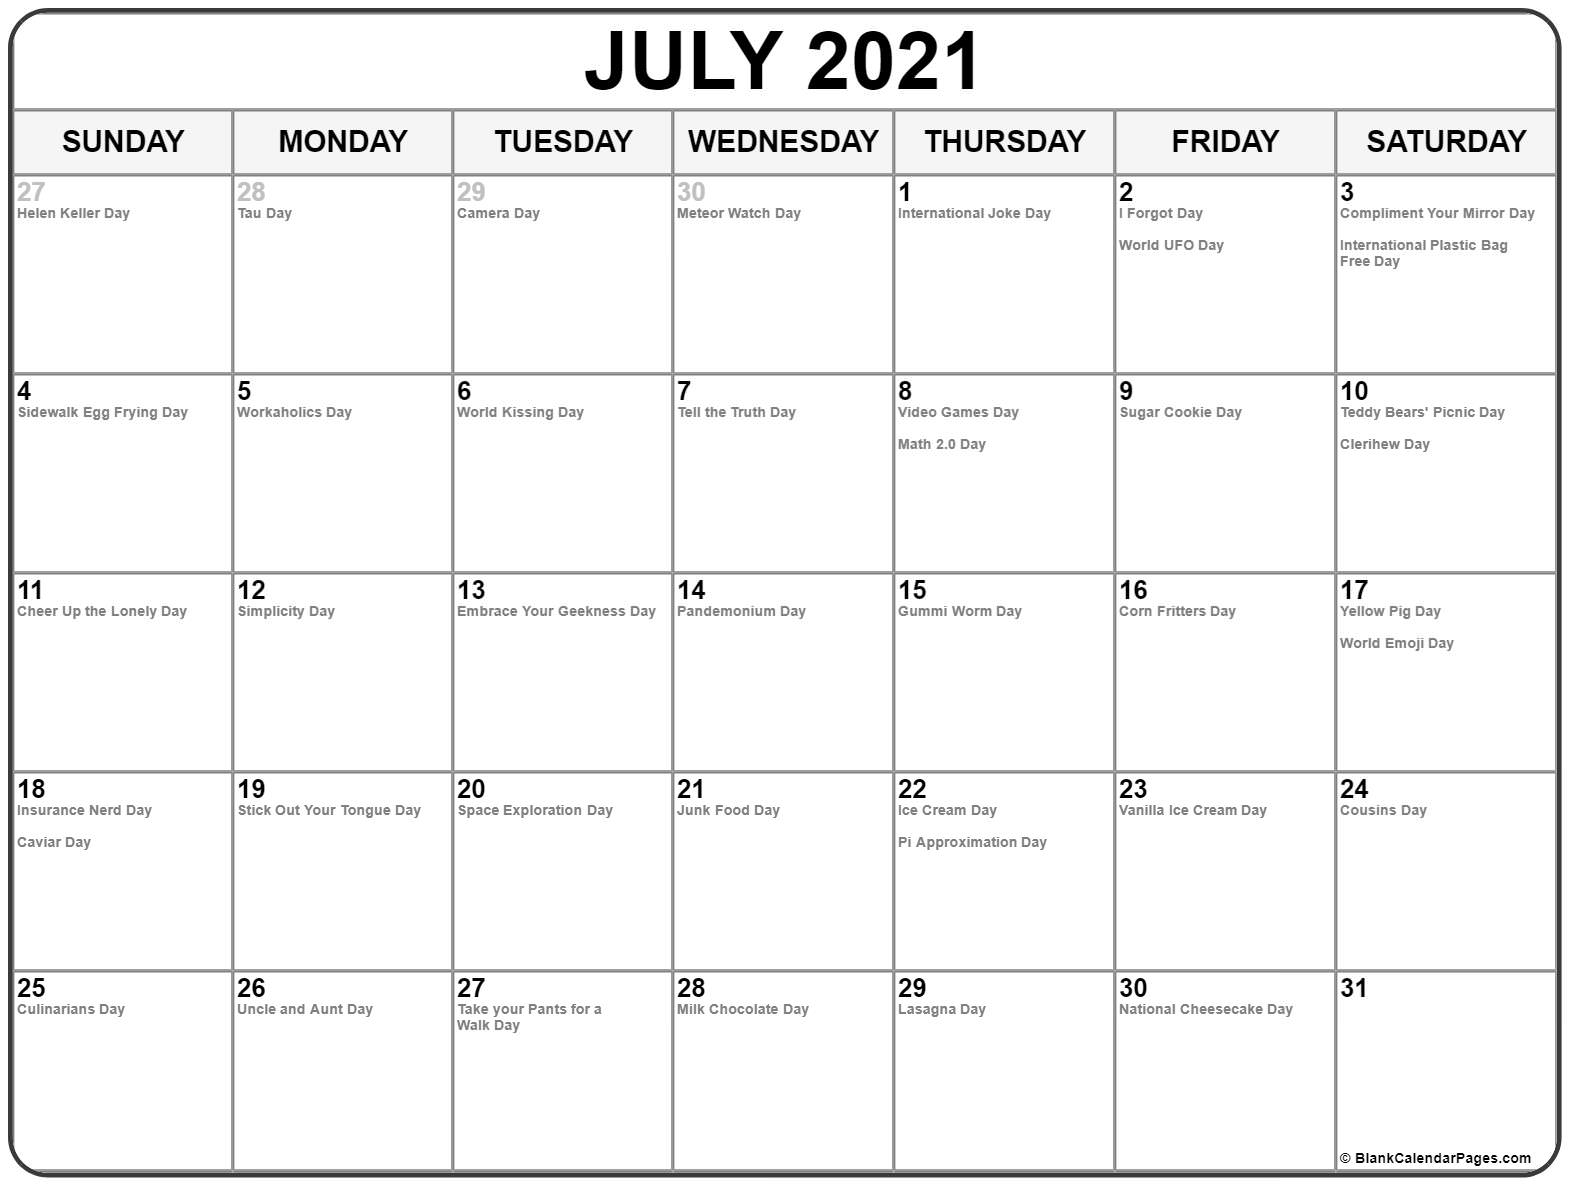 july 2021 calendar with holidays